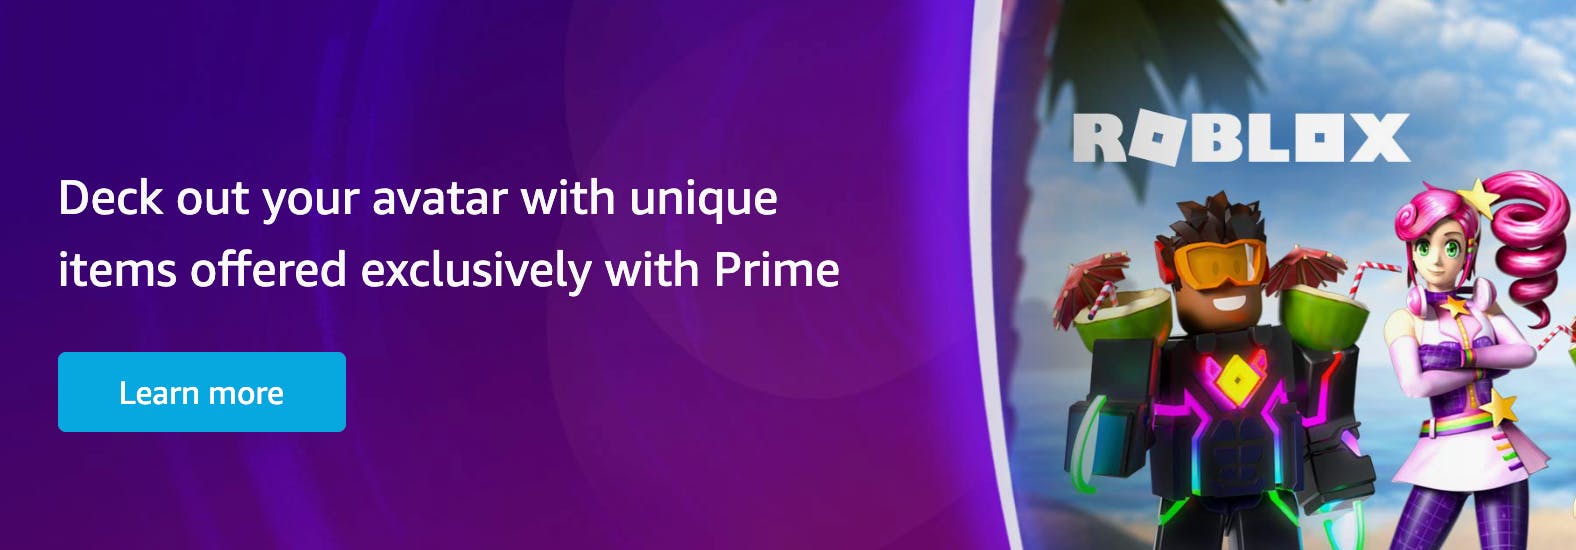 Amazon Prime Is Giving Away Free Video Games The Krazy Coupon Lady - roblox prime gaming items